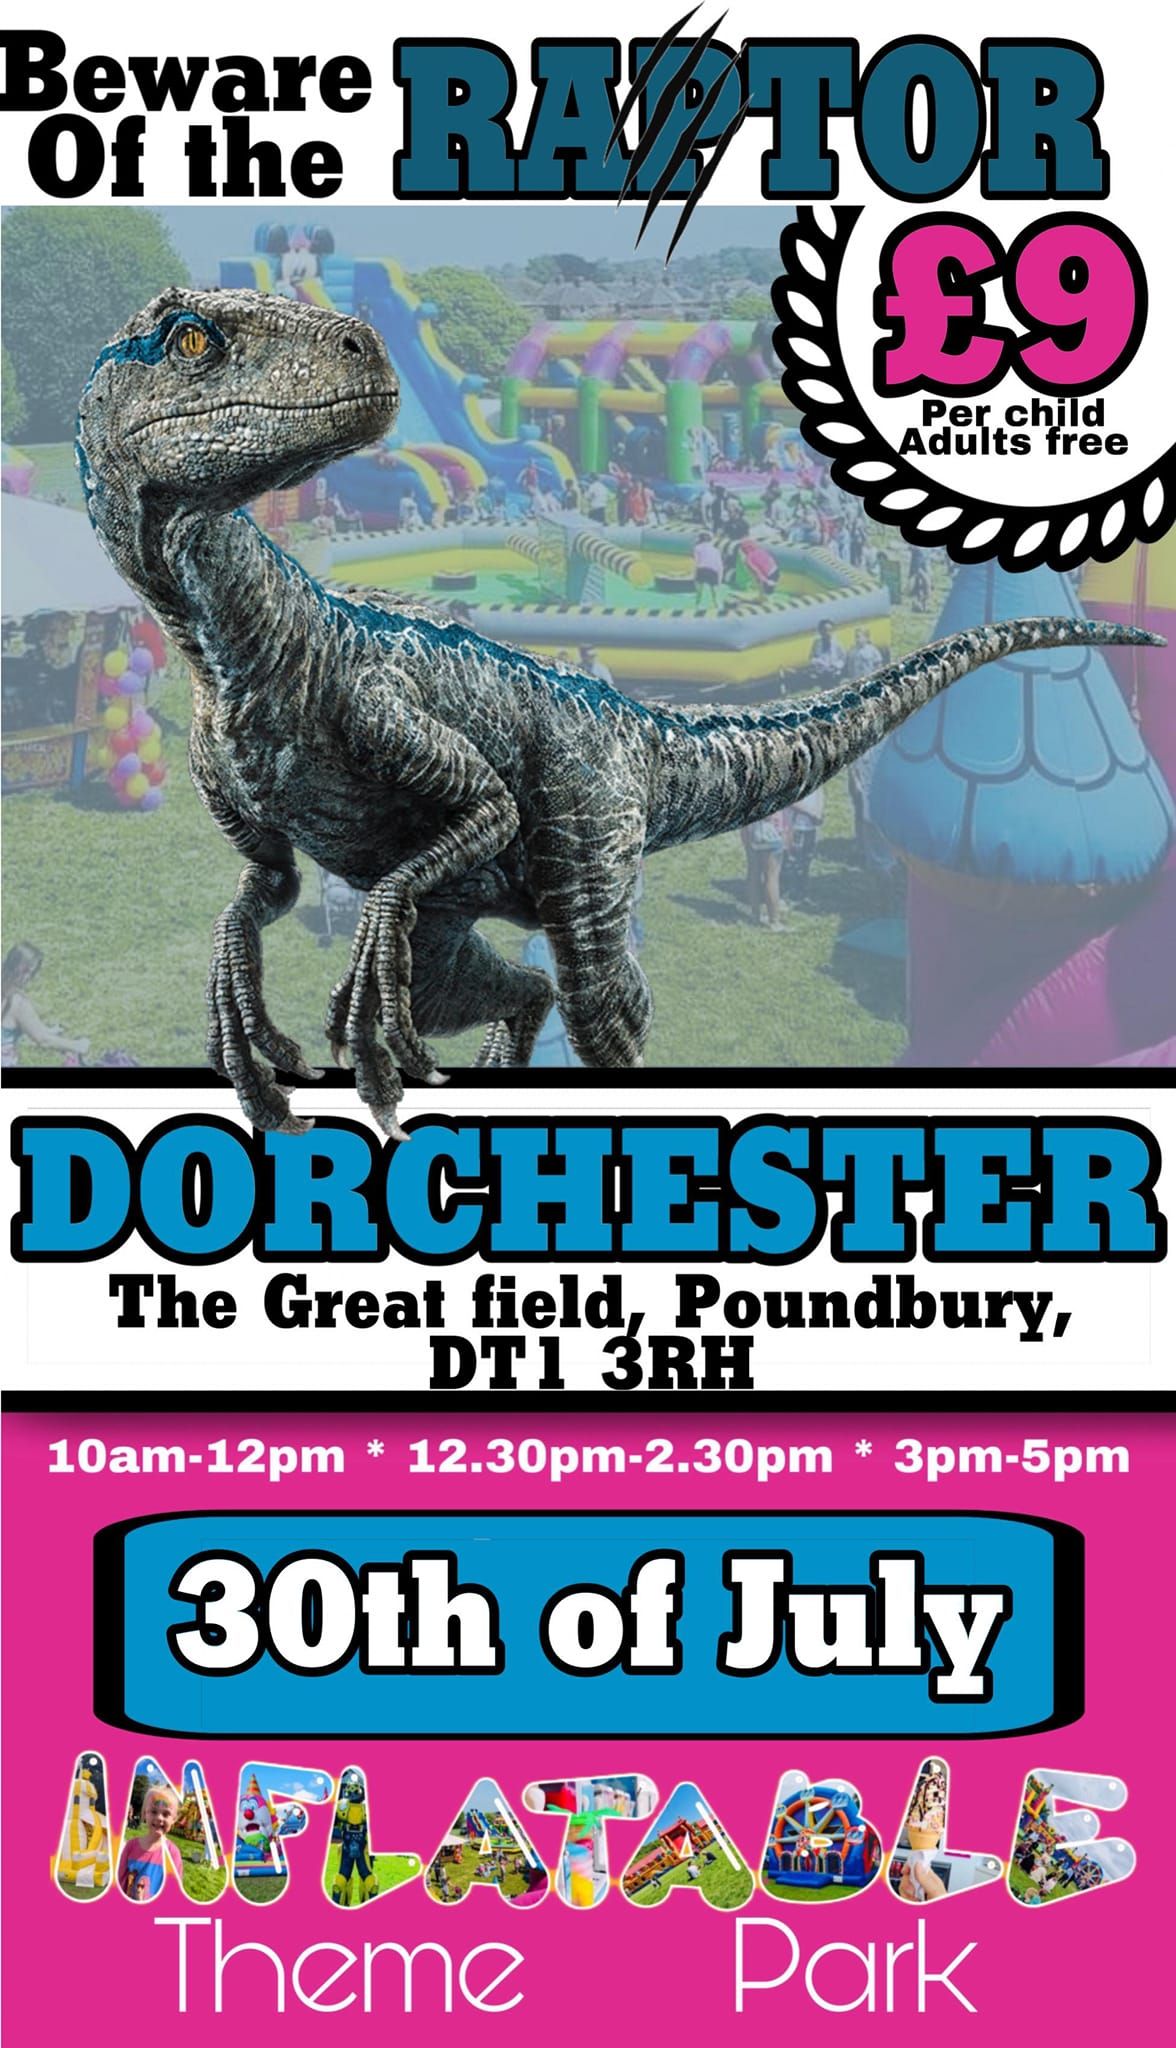 Dinosaur day at Dorchester Inflatable Park